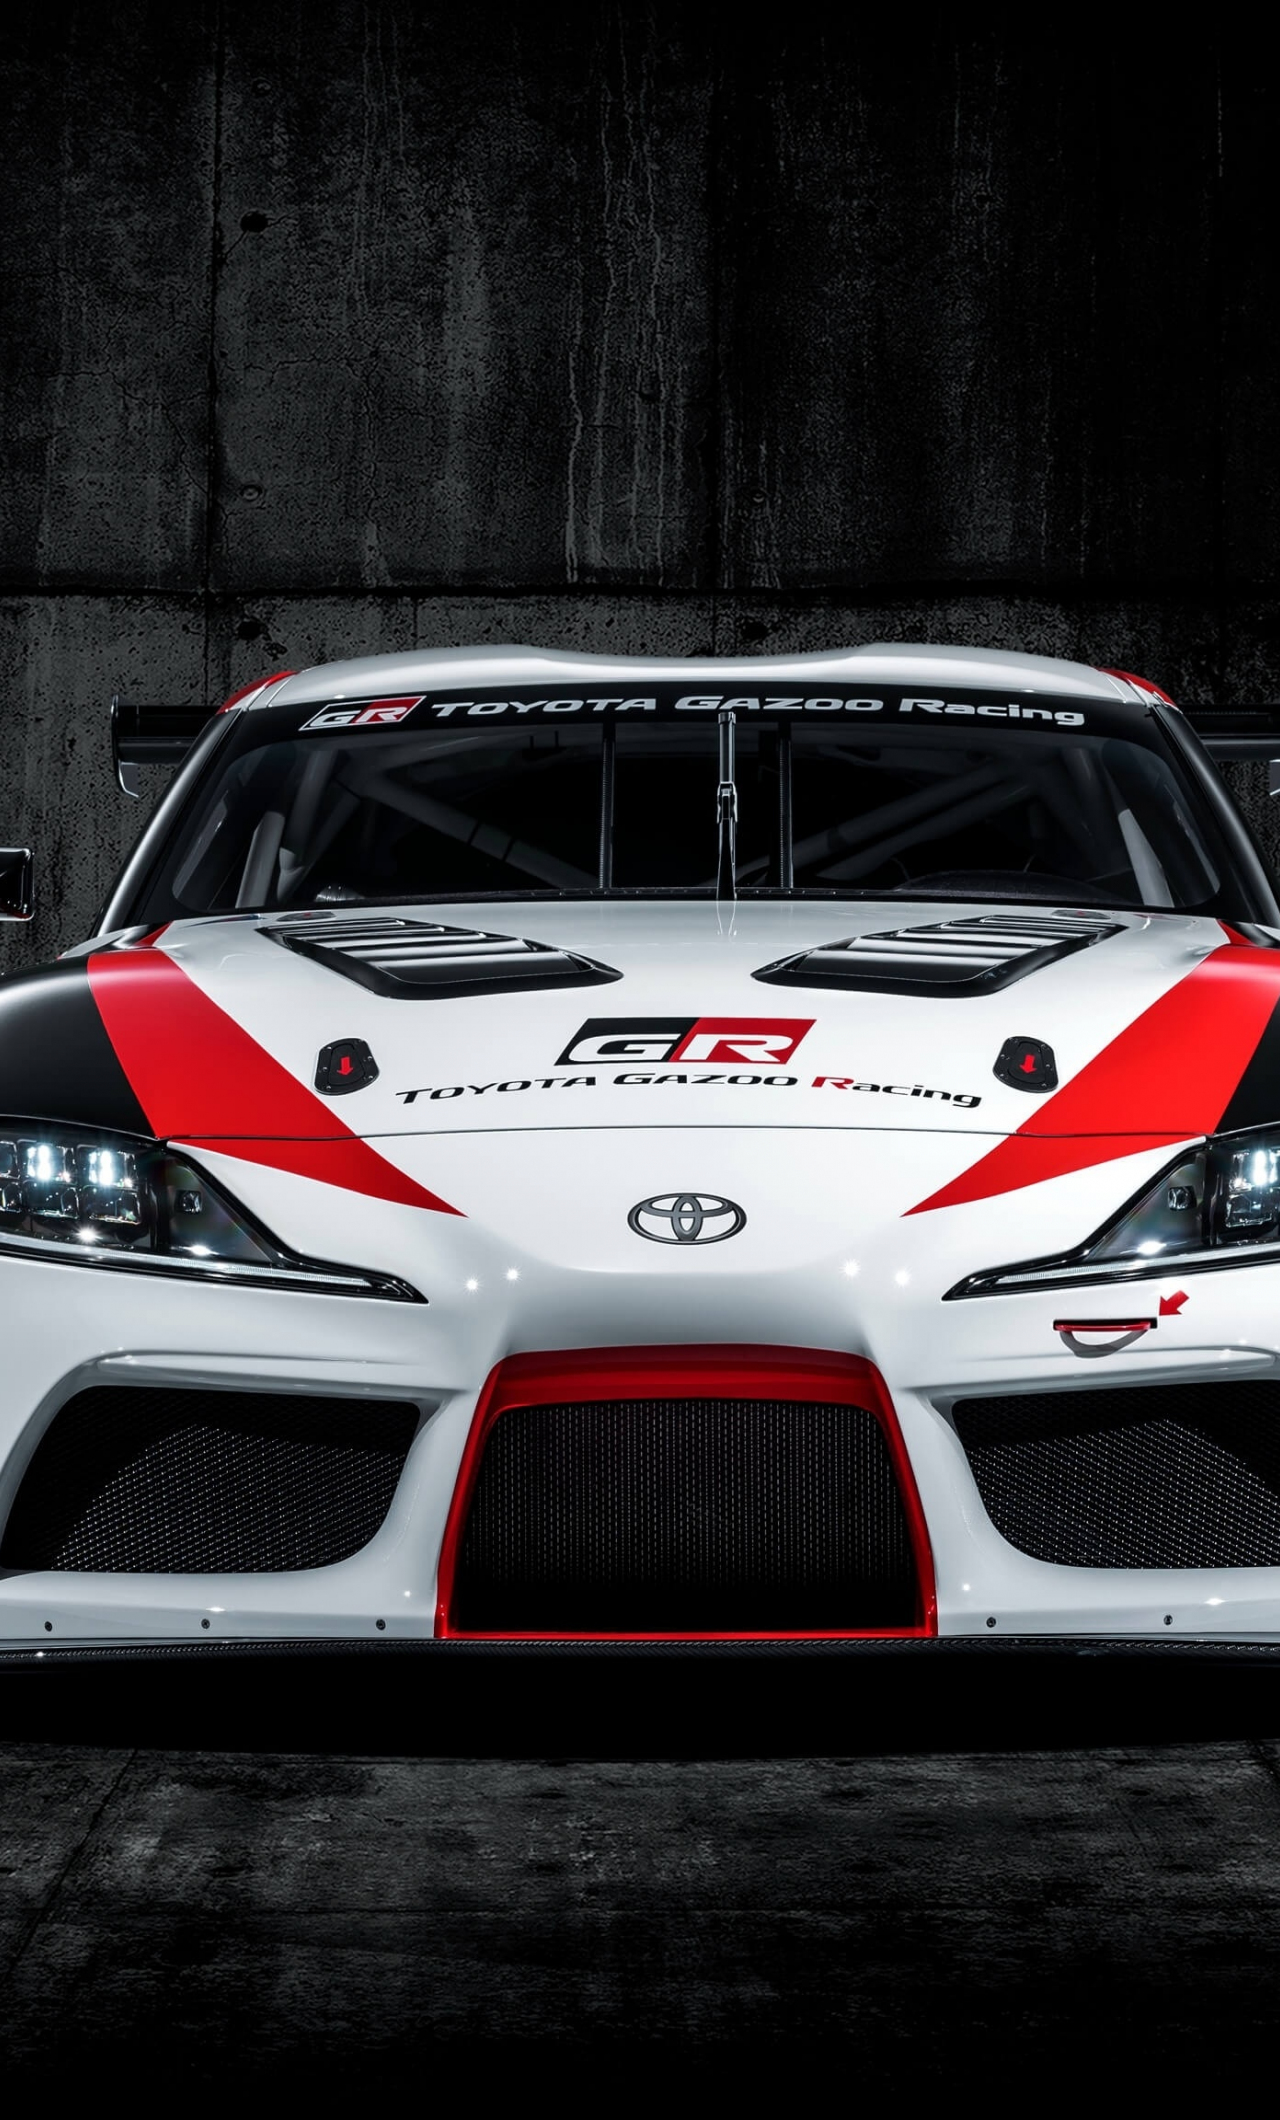 Download 1280x21 Wallpaper Toyota Gr Supra Sports Car Front Iphone 6 Plus 1280x21 Hd Image Background